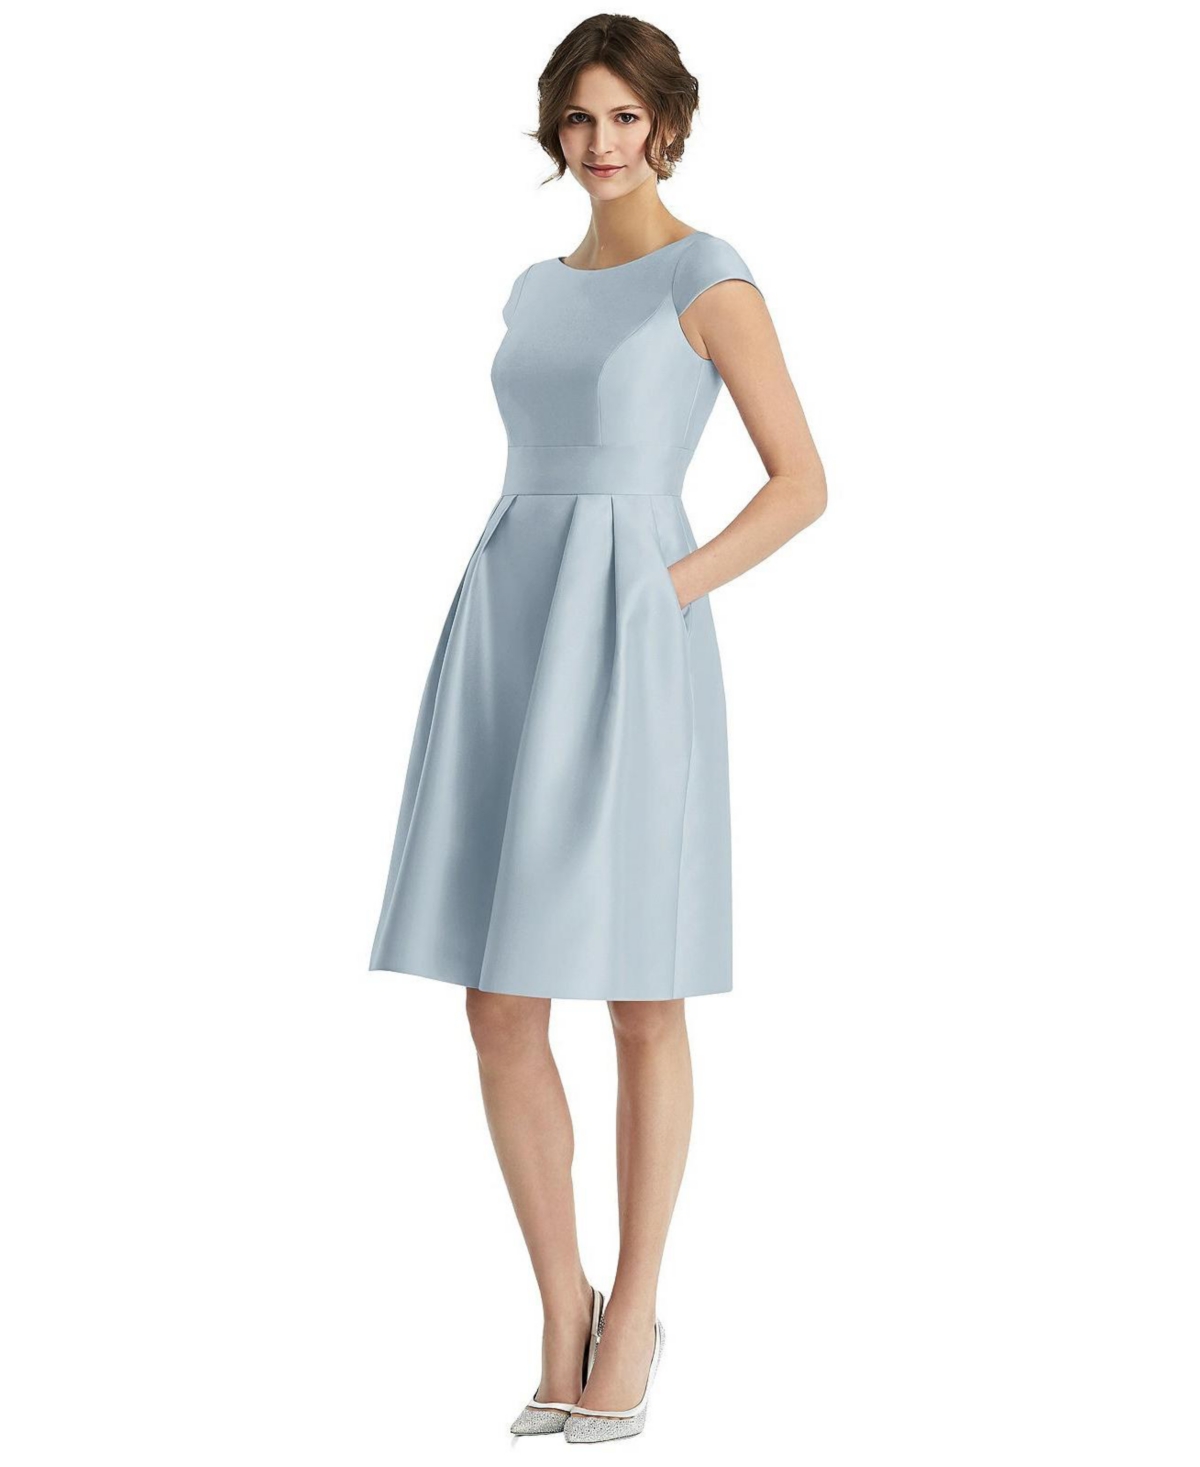 Womens Cap Sleeve Pleated Cocktail Dress with Pockets - Mist